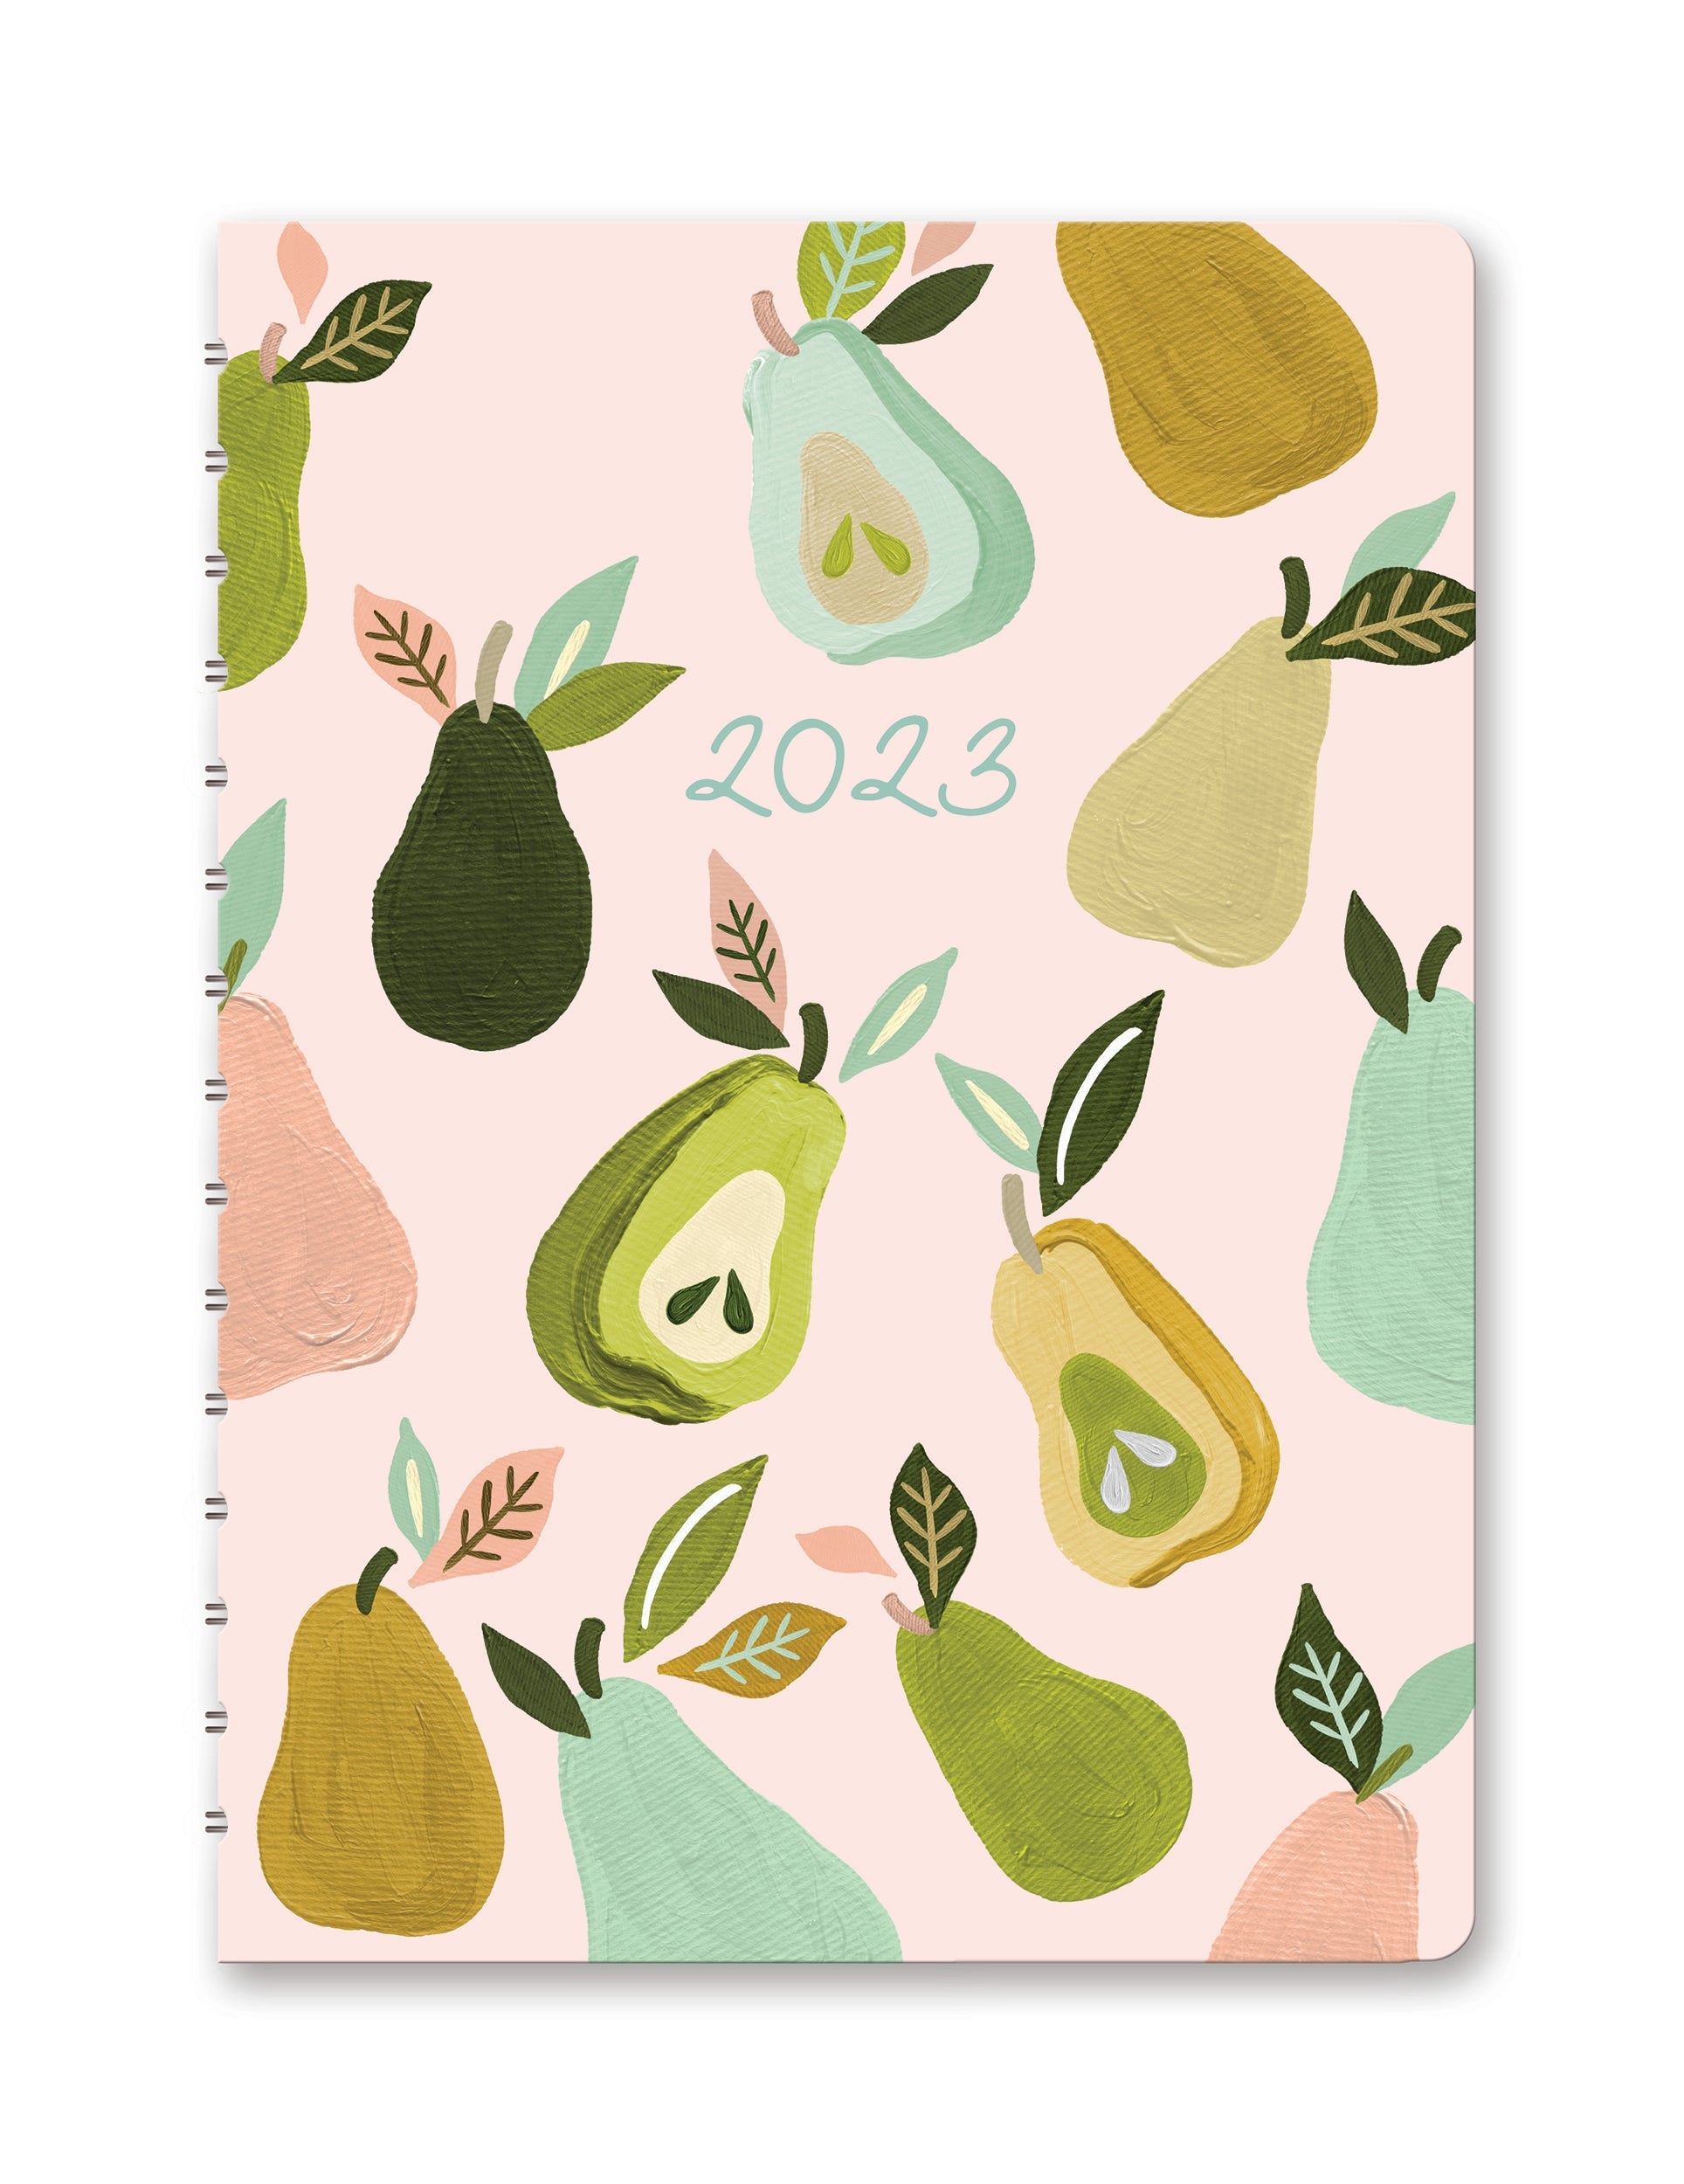 2023 Au Pears by CatCoq (Ondine Tabbed Weekly/Monthly Planner) - Diary/Planner